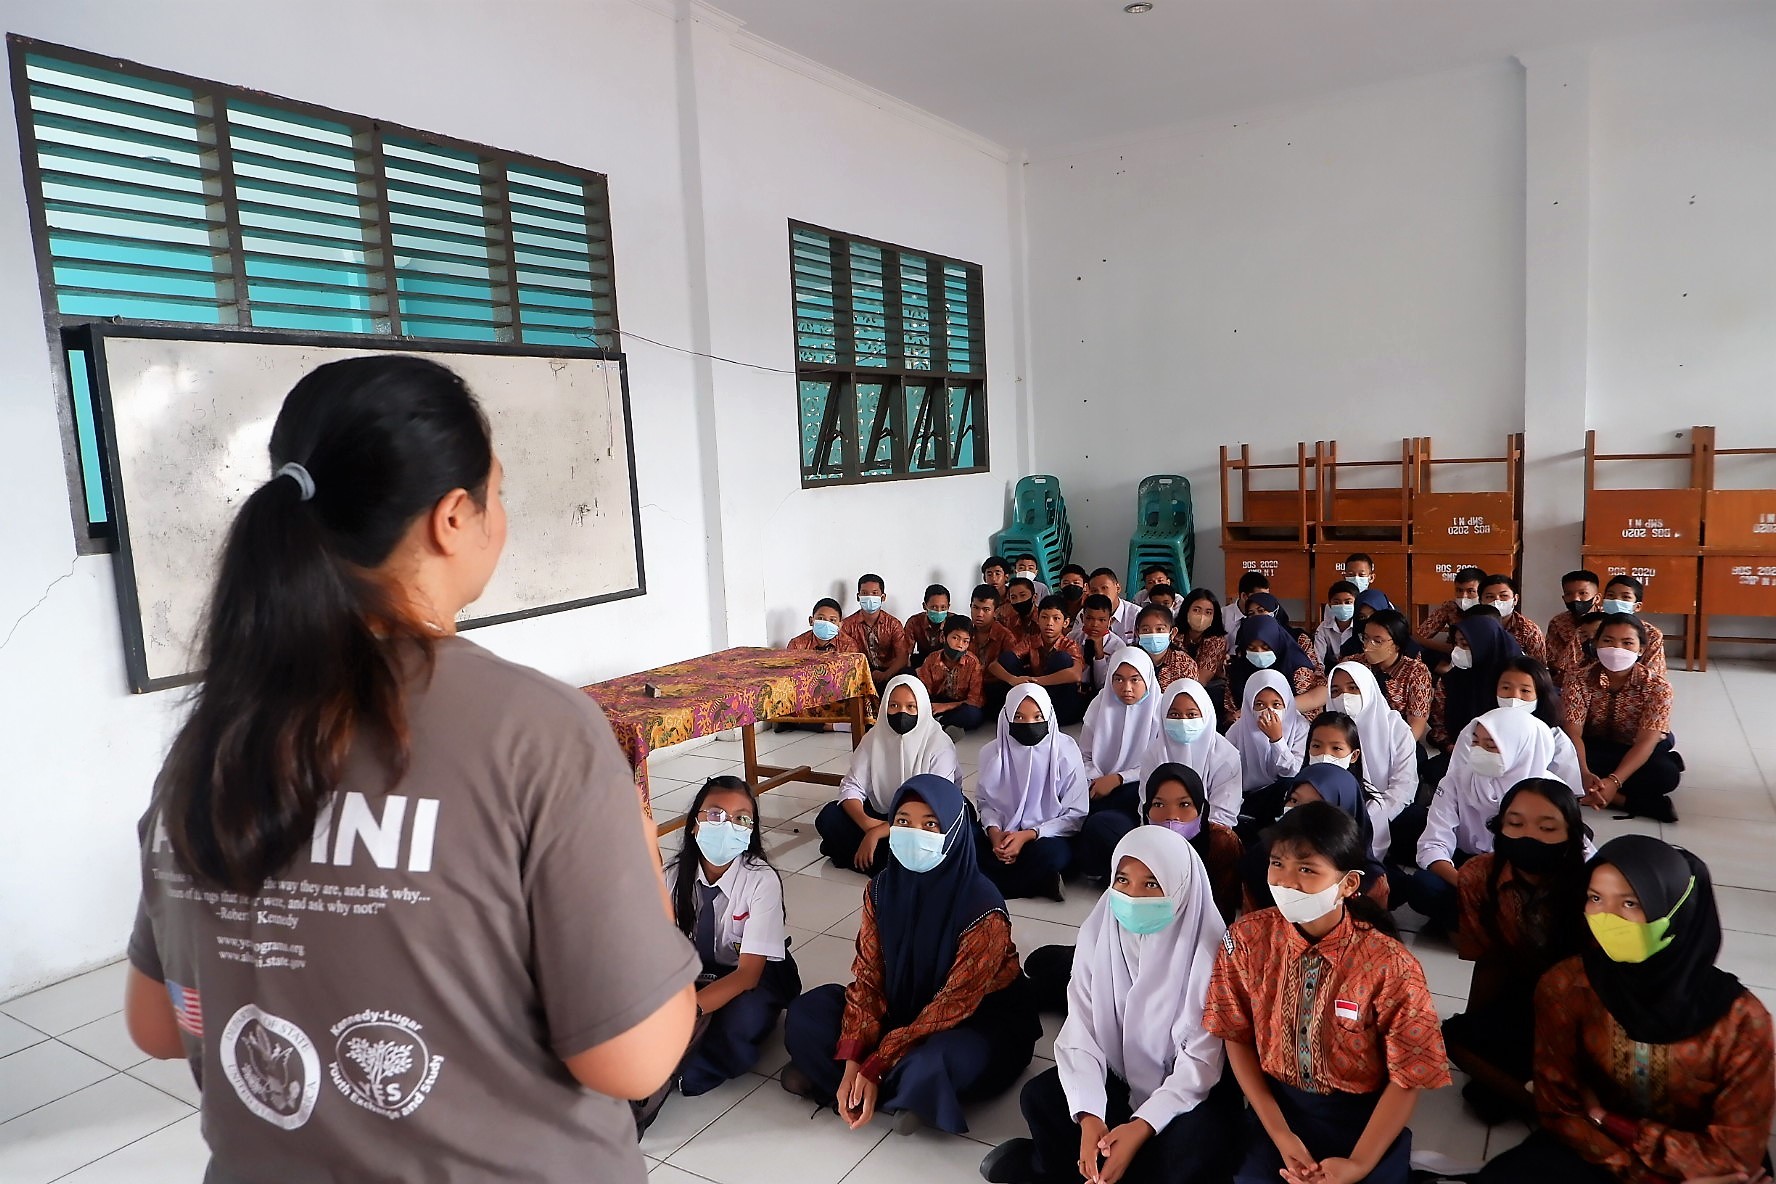 Viona conducting a presentation at the front of a classroom of many students in Indonesia